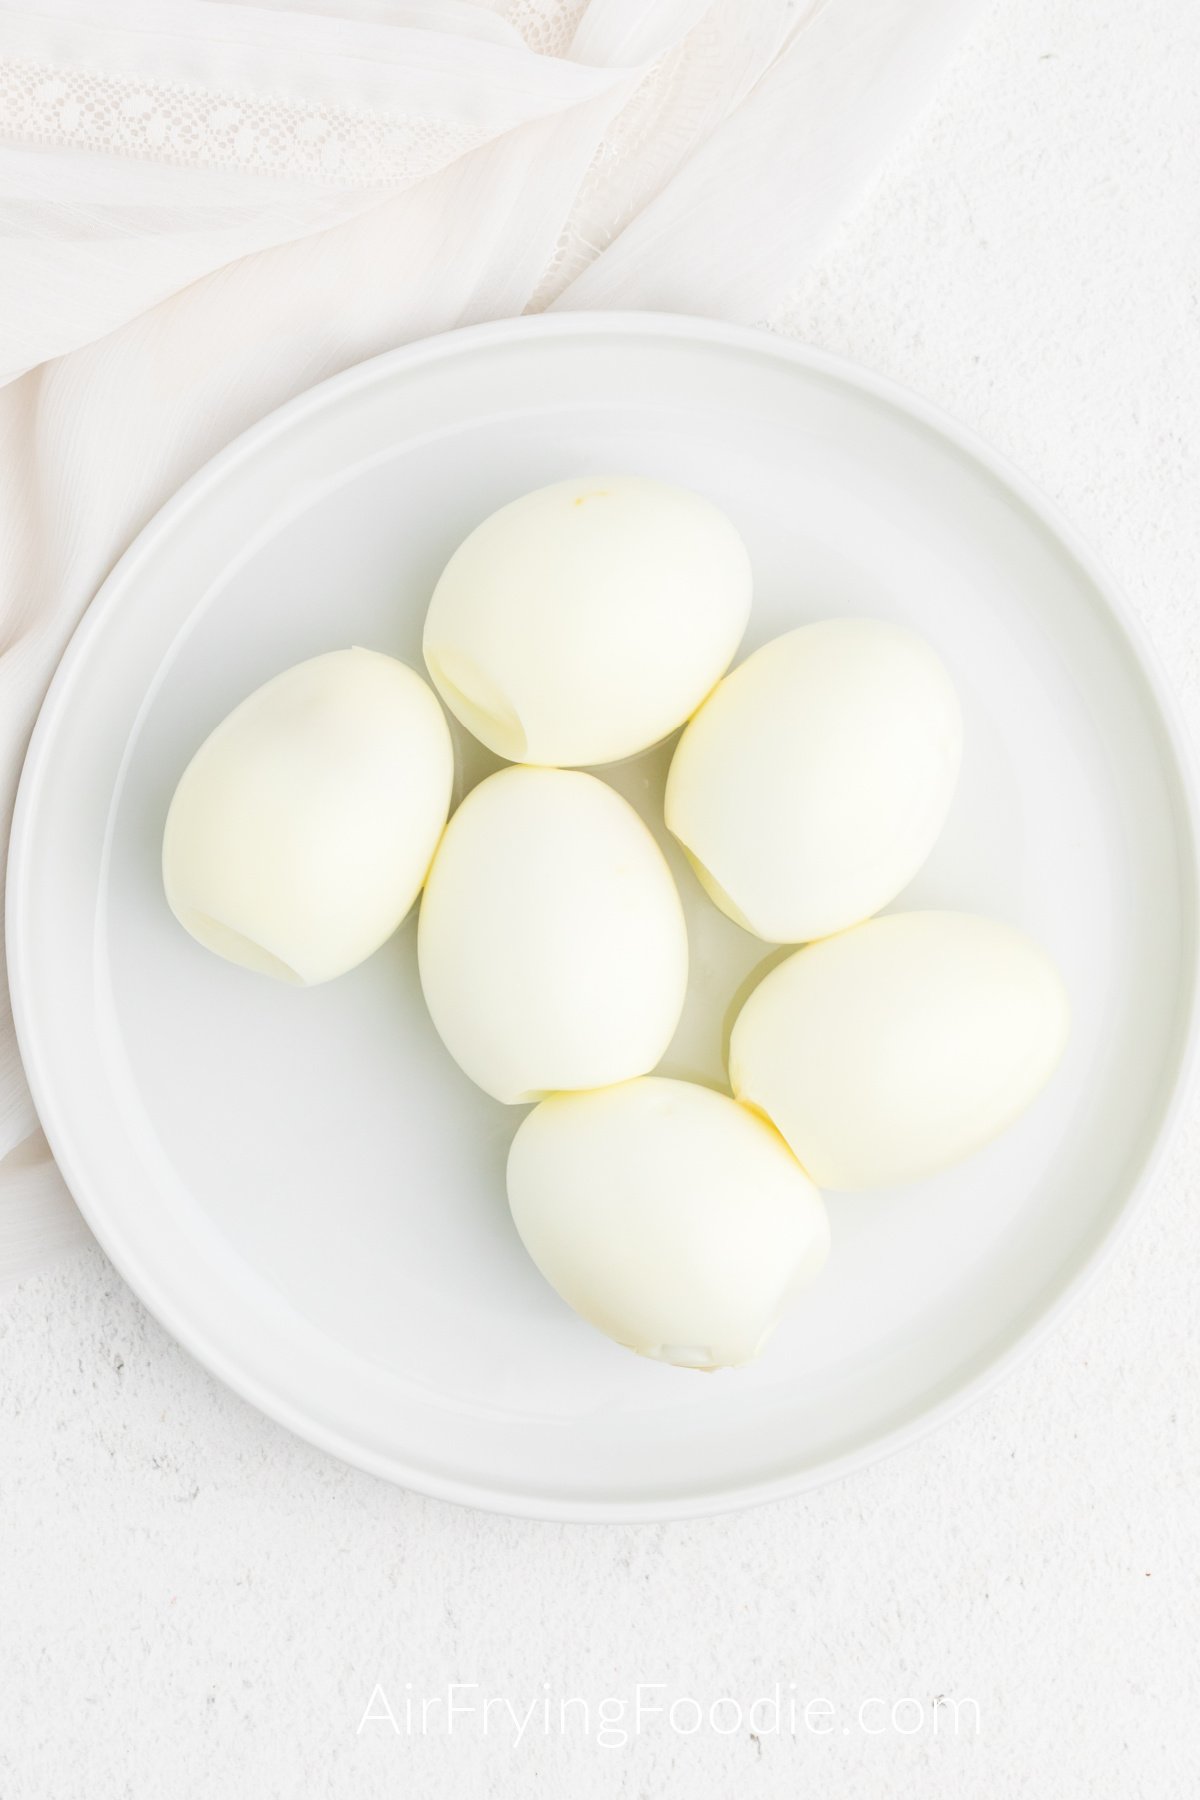 Boiled and peeled eggs that were made in the air fryer - on a white plate.